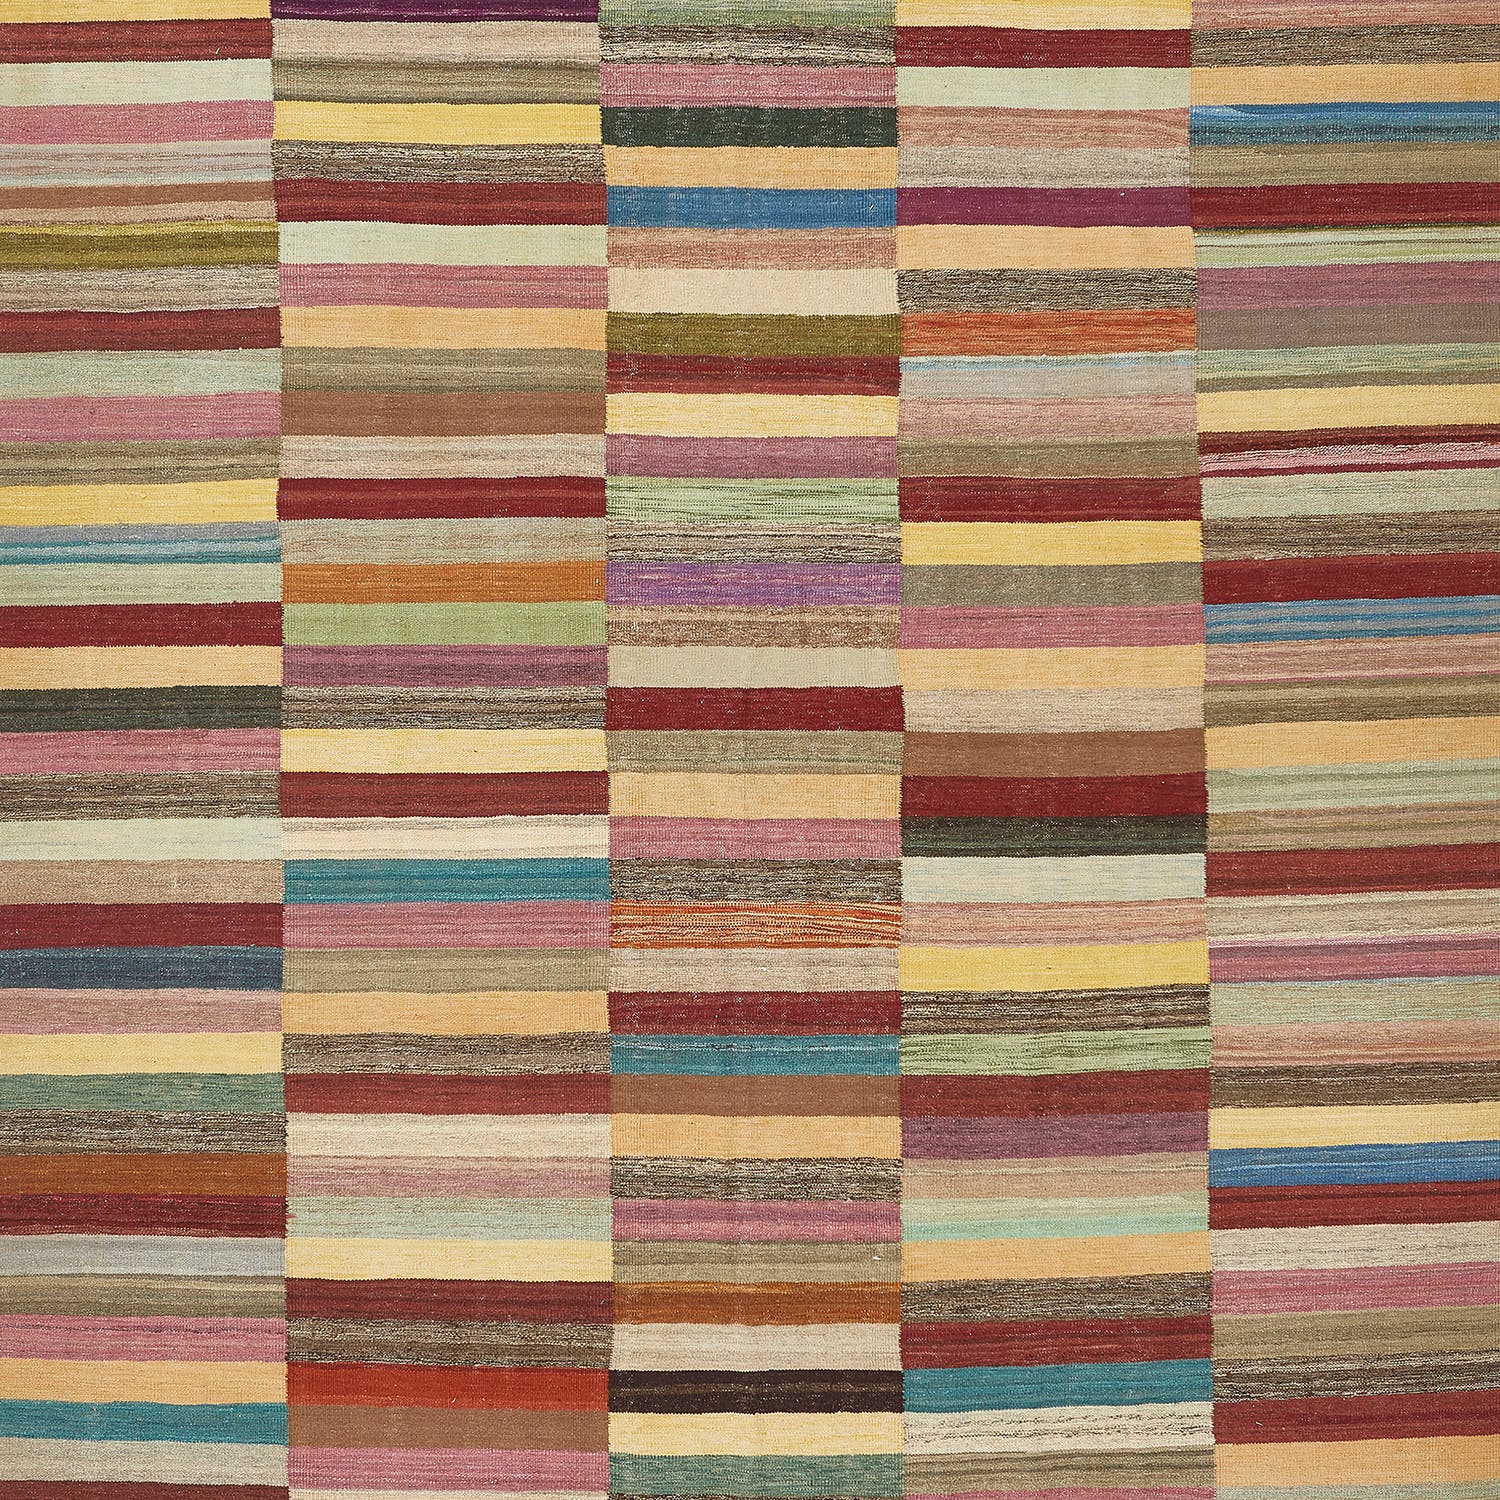 Vibrant, handwoven textile with intricate striped pattern and diverse colors.